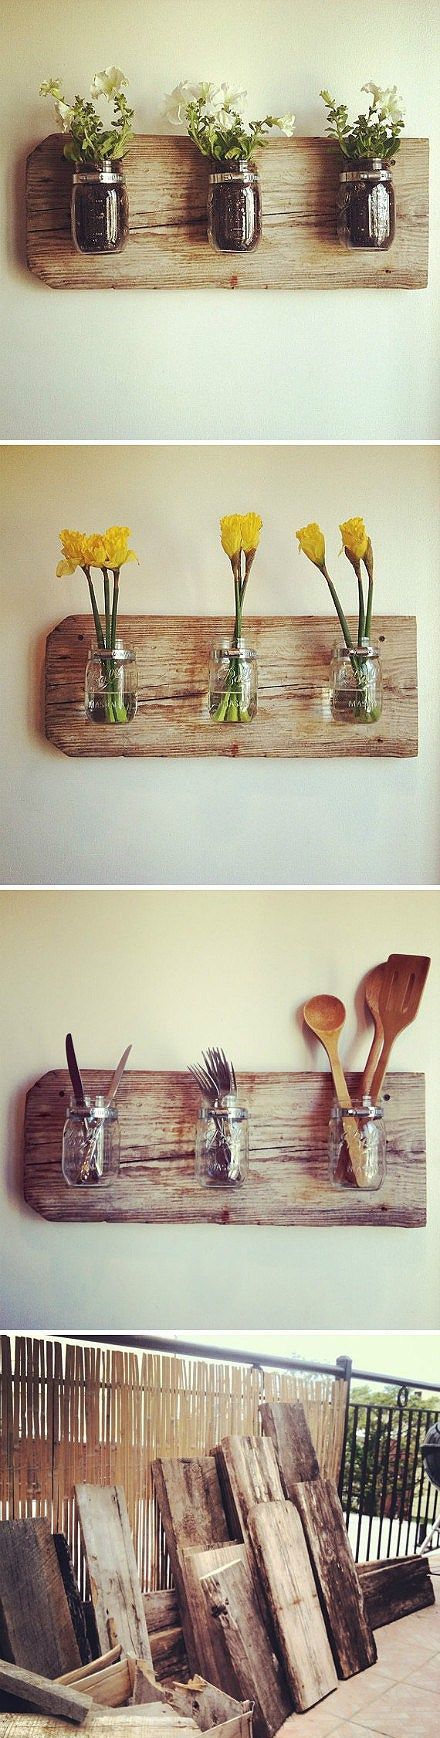 Home Decor with Mason Jars and Reclaimed Wood